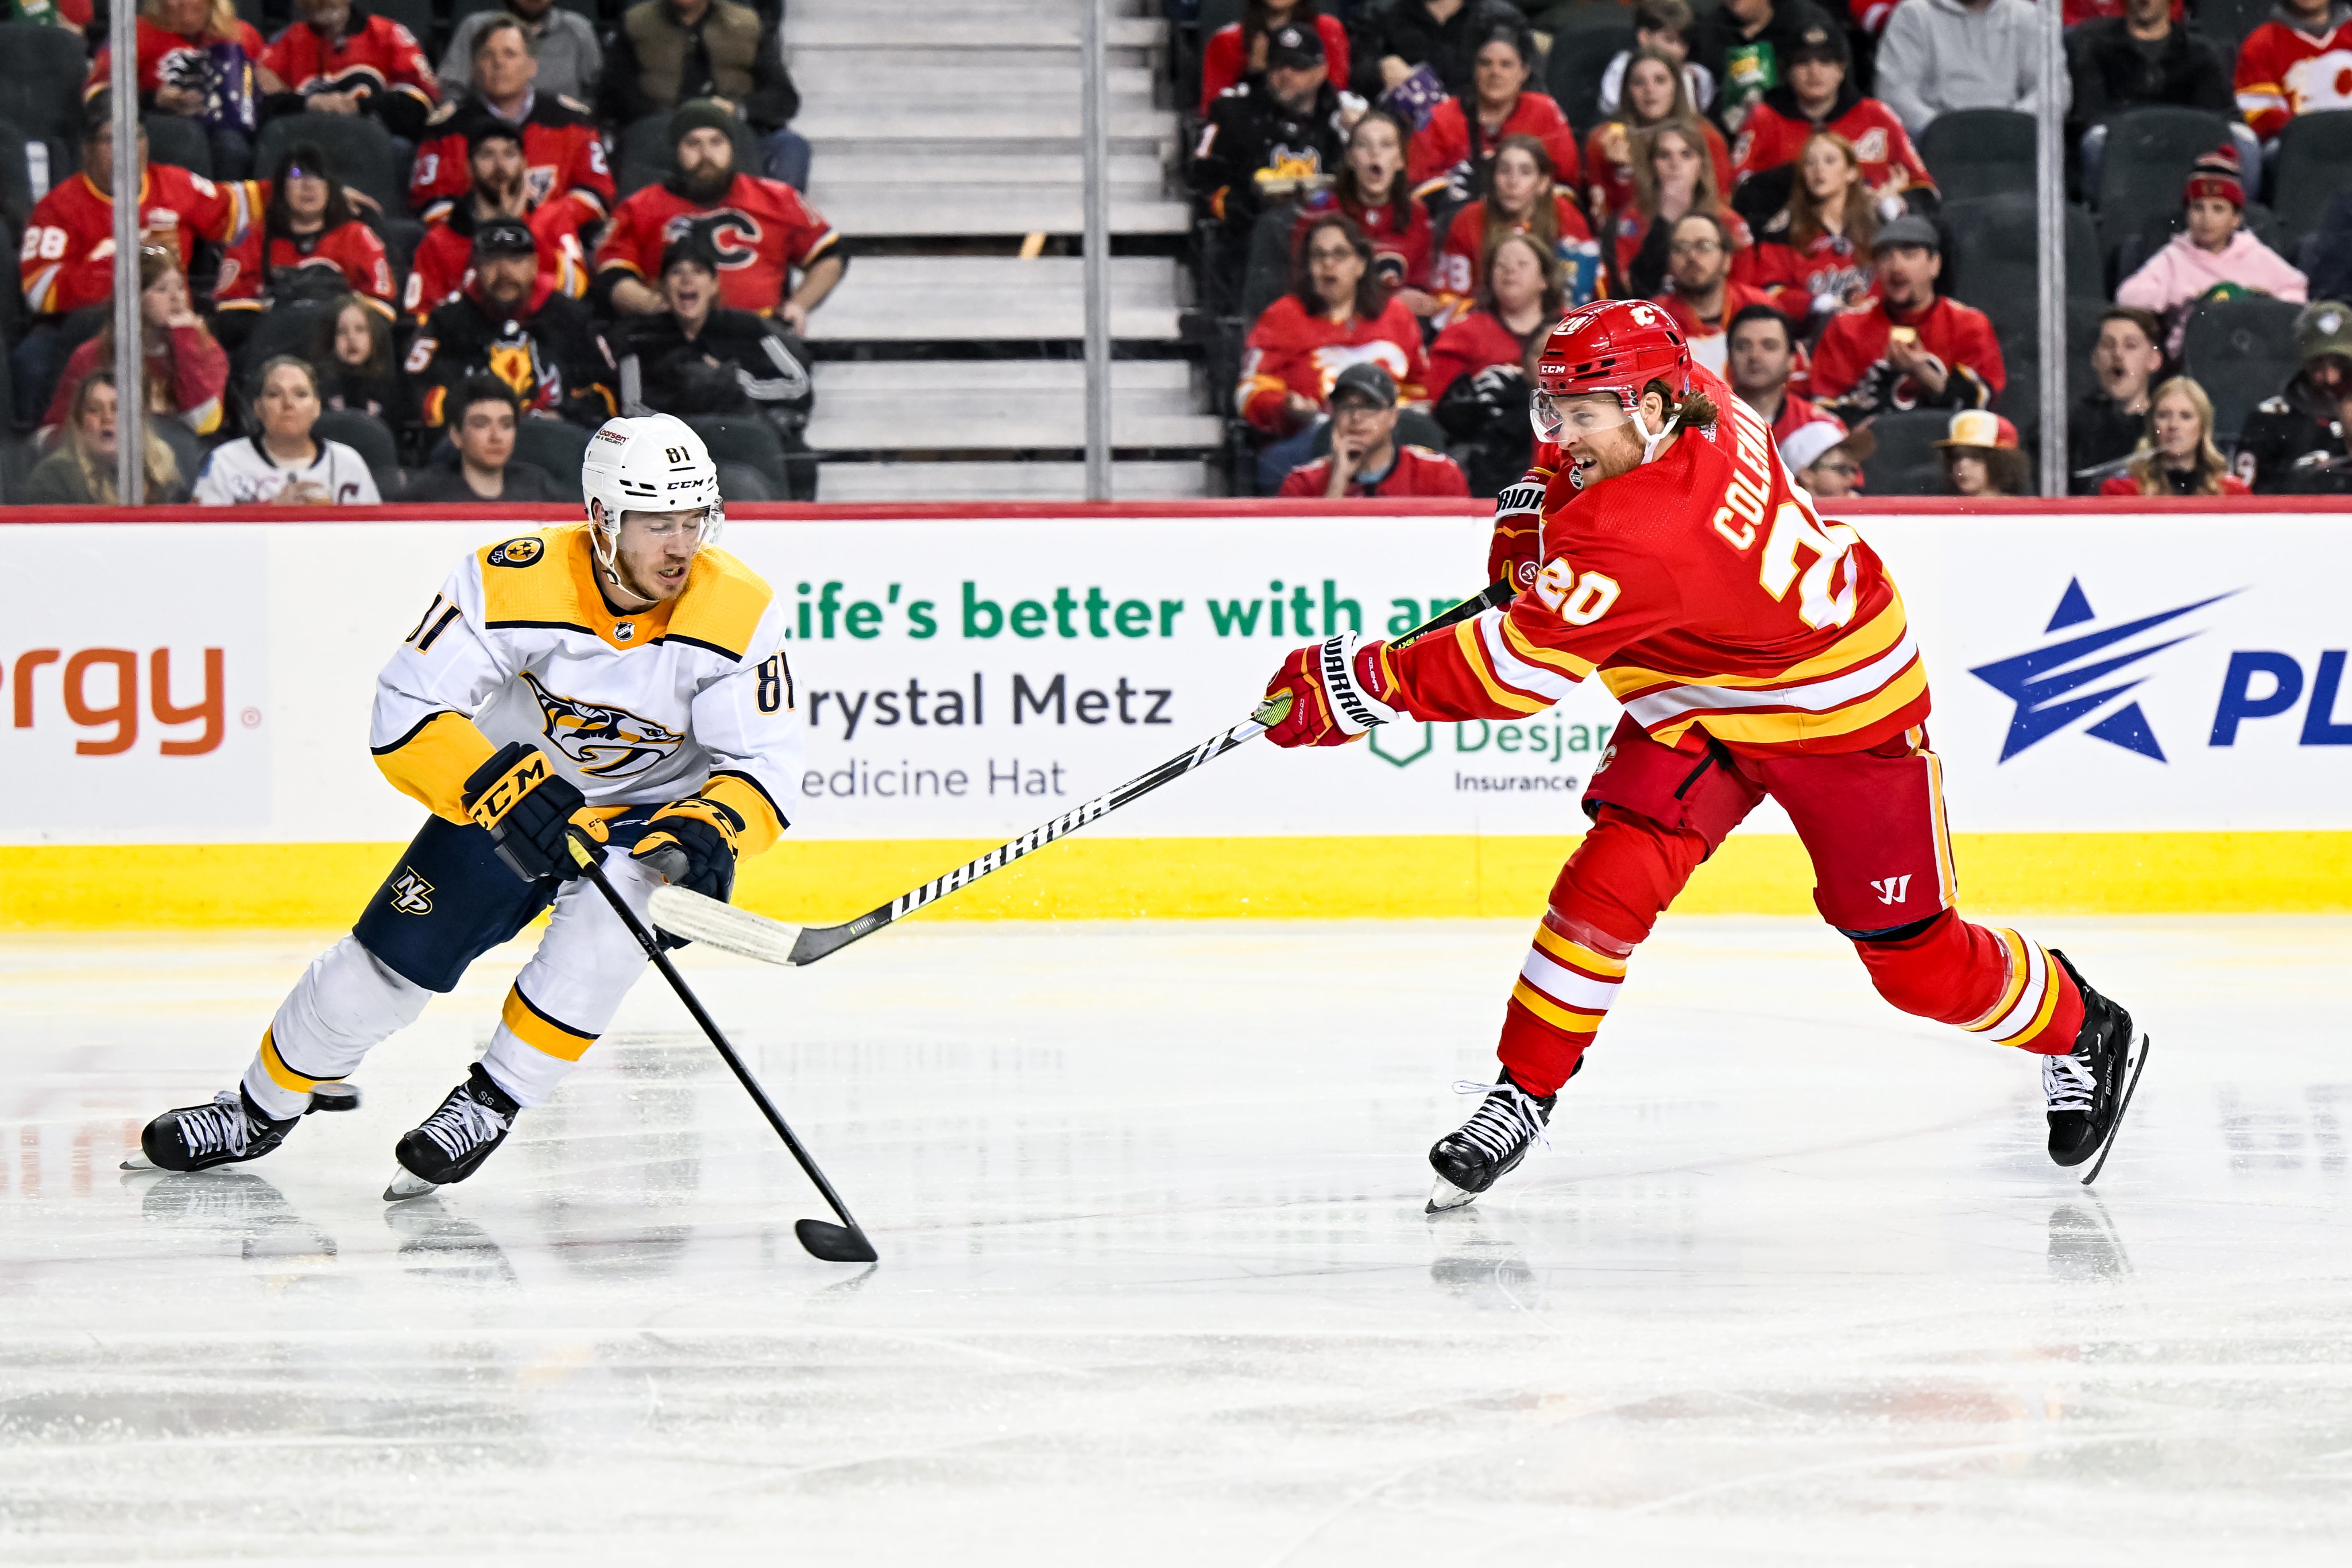 Blake Coleman will look to help the embattled Calgary Flames battle turmoil and return to the Stanley cup Playoffs. - Phot Courtesy of the Calgary Flames